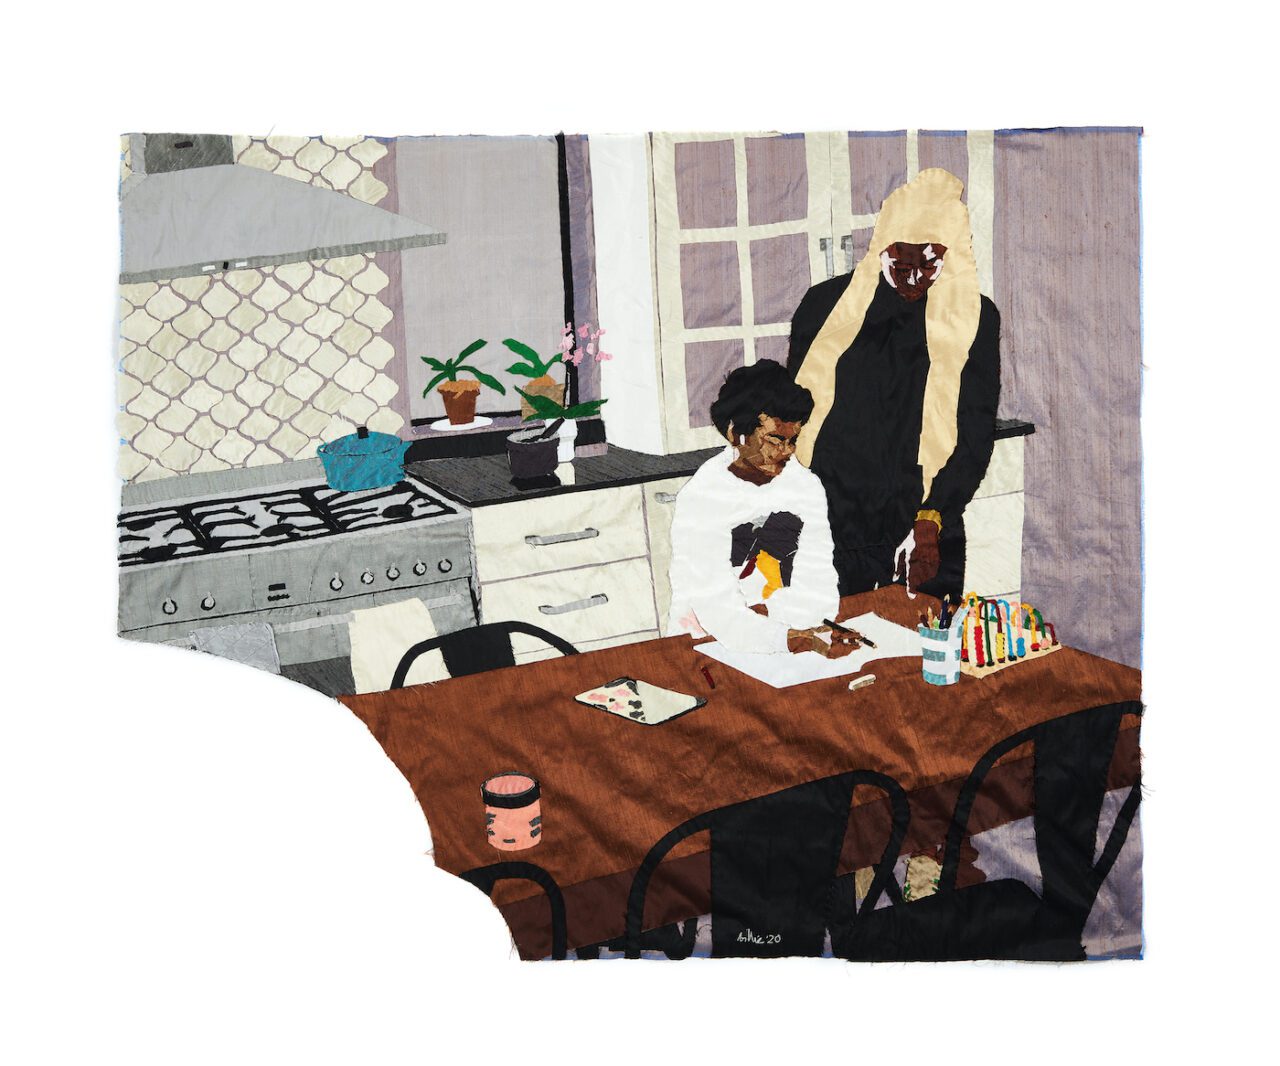 Billie Zangewa, Heart of the Home, 2020. Hand-stitched silk collage, 43 1/4 x 53 1/2 inches. Courtesy of Lehmann Maupin
